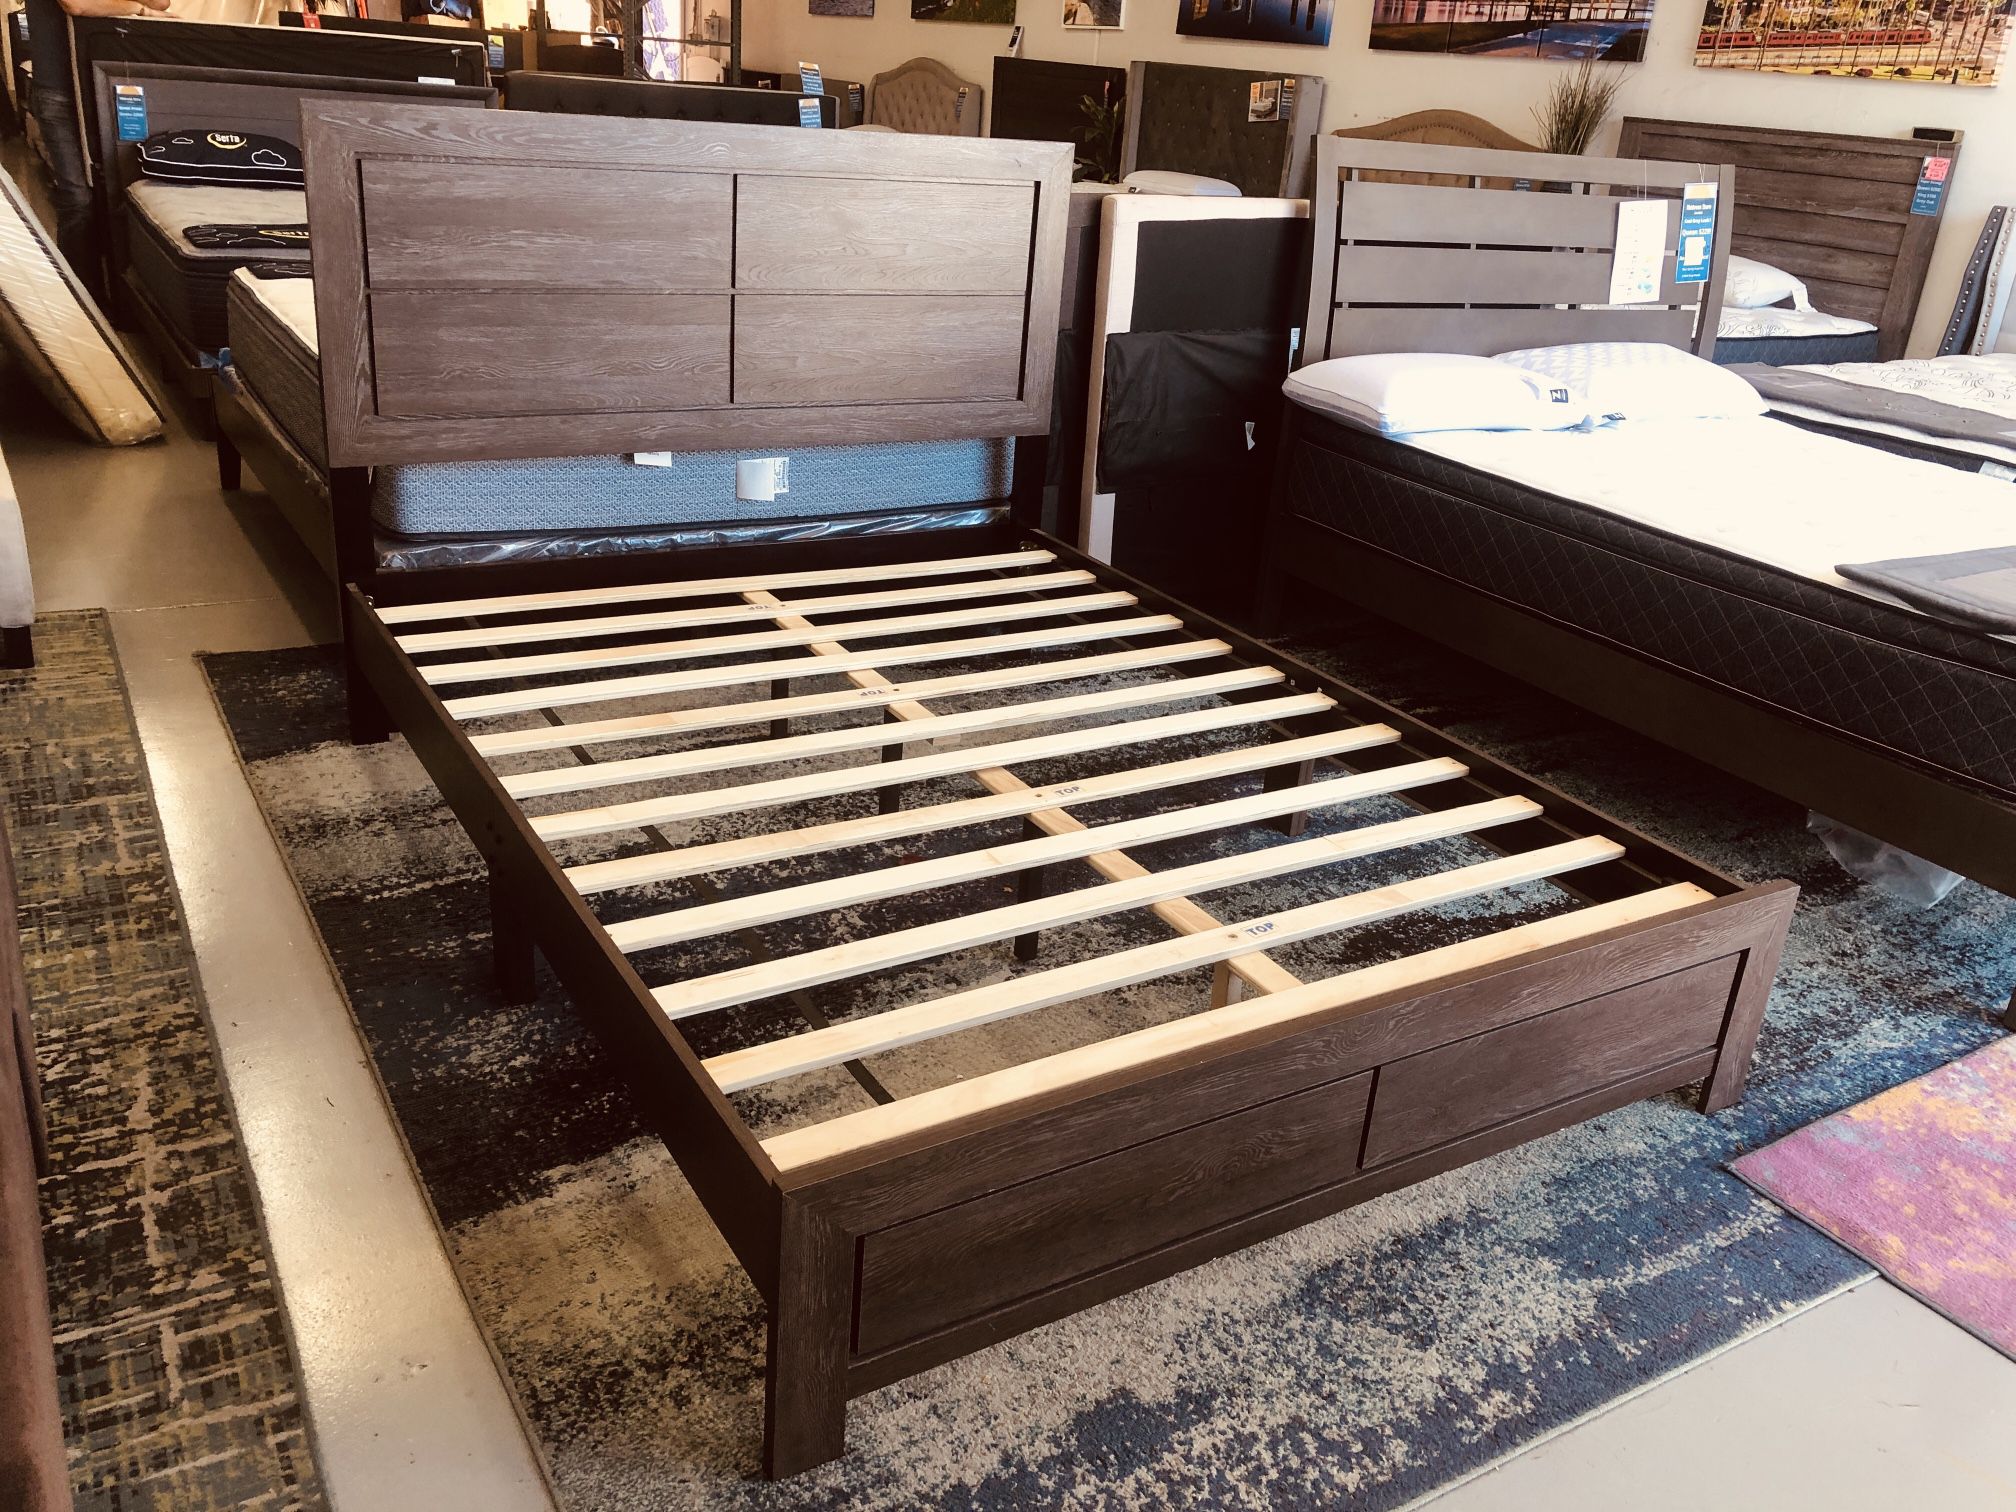 New Platform Bed Frame Wooden Look King Queen And Full From Only 